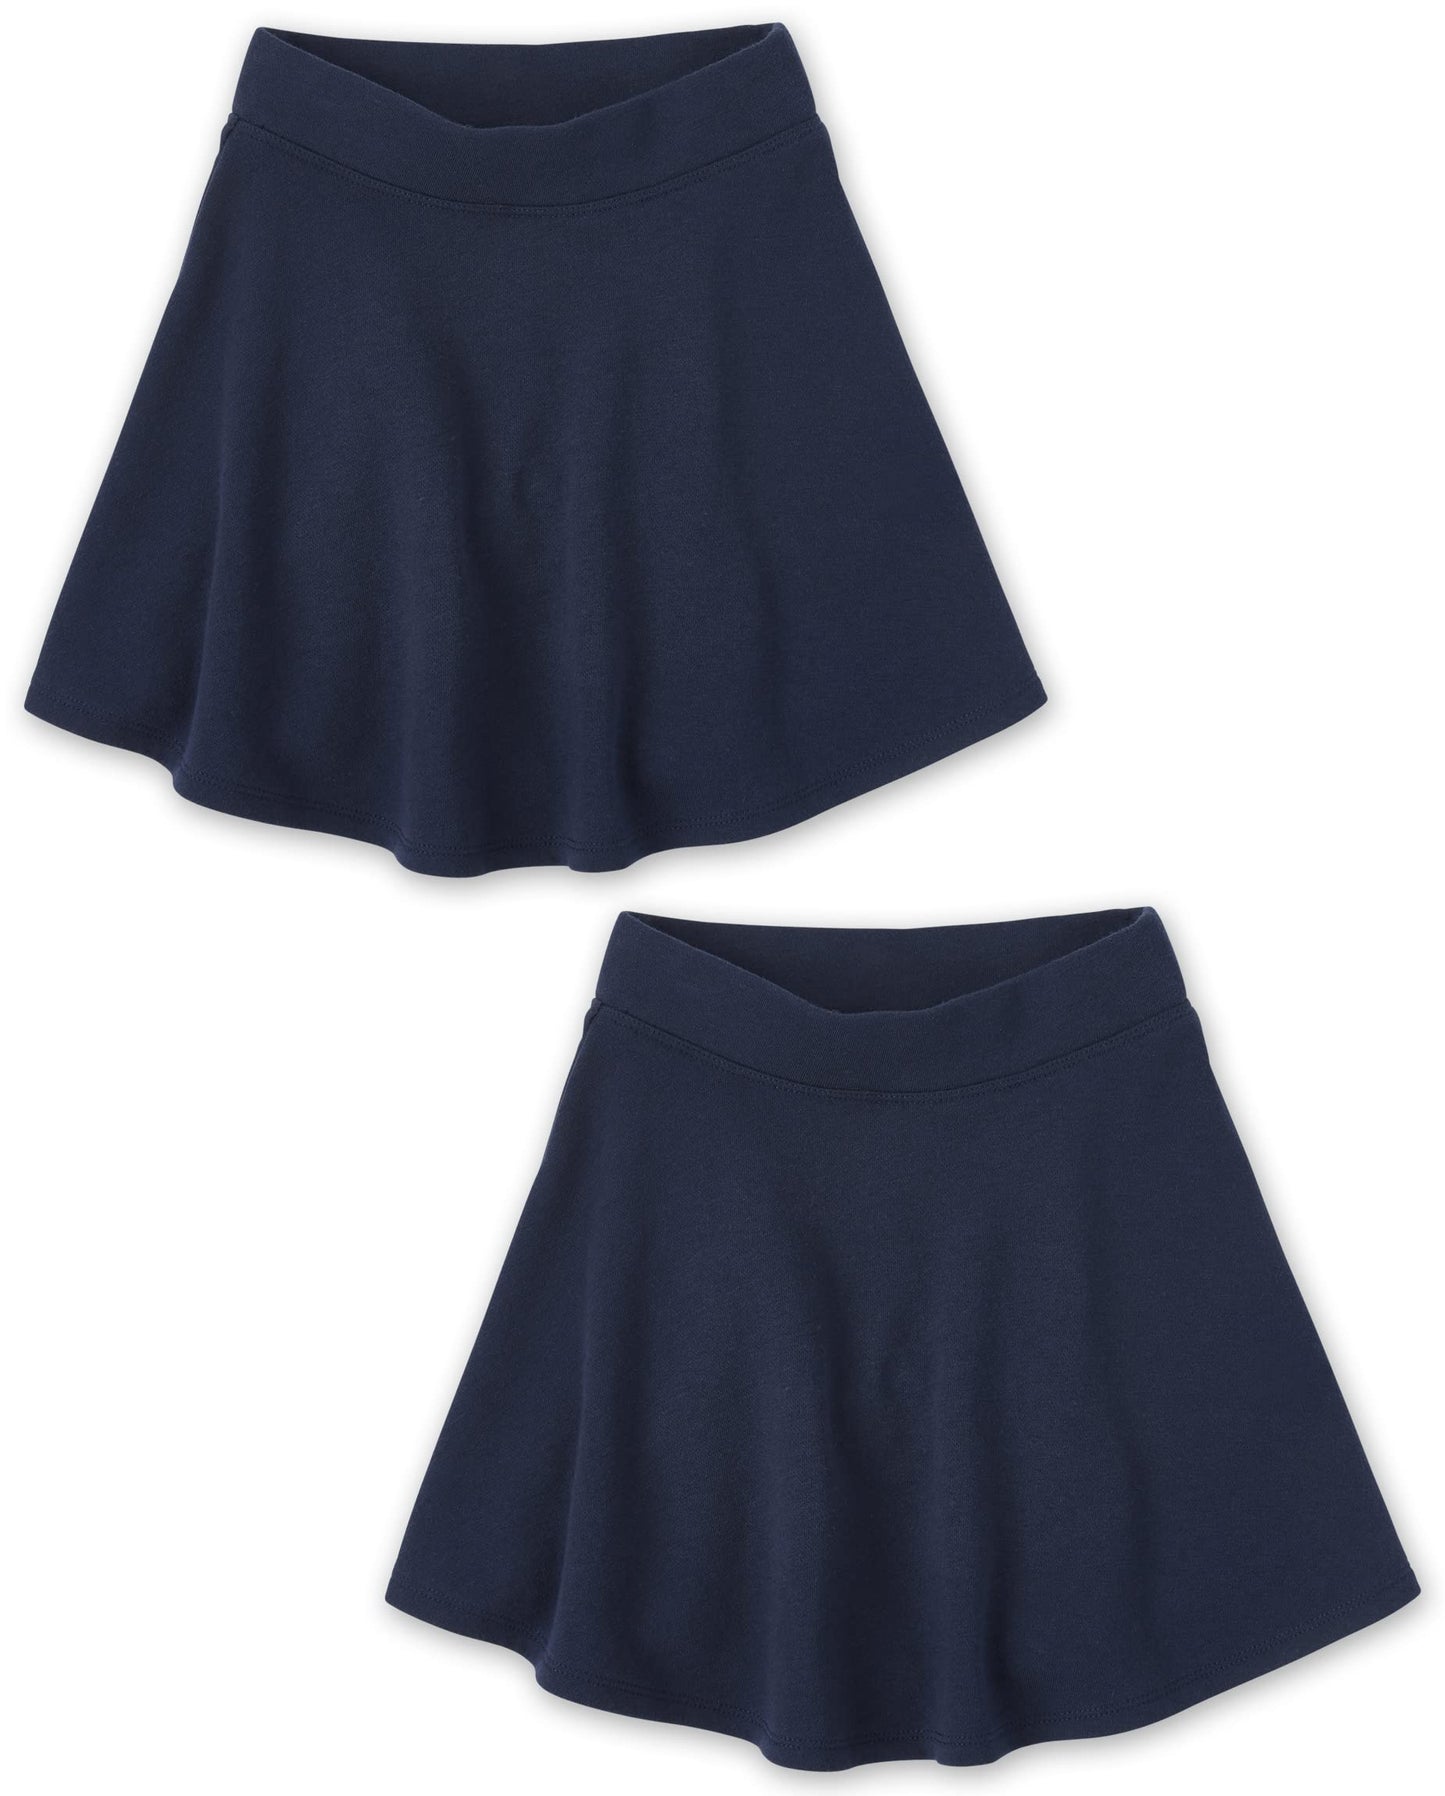 The Children's Place girls Uniform Active French Terry Skort 2-Pack Skirt Set (pack of 2) XS